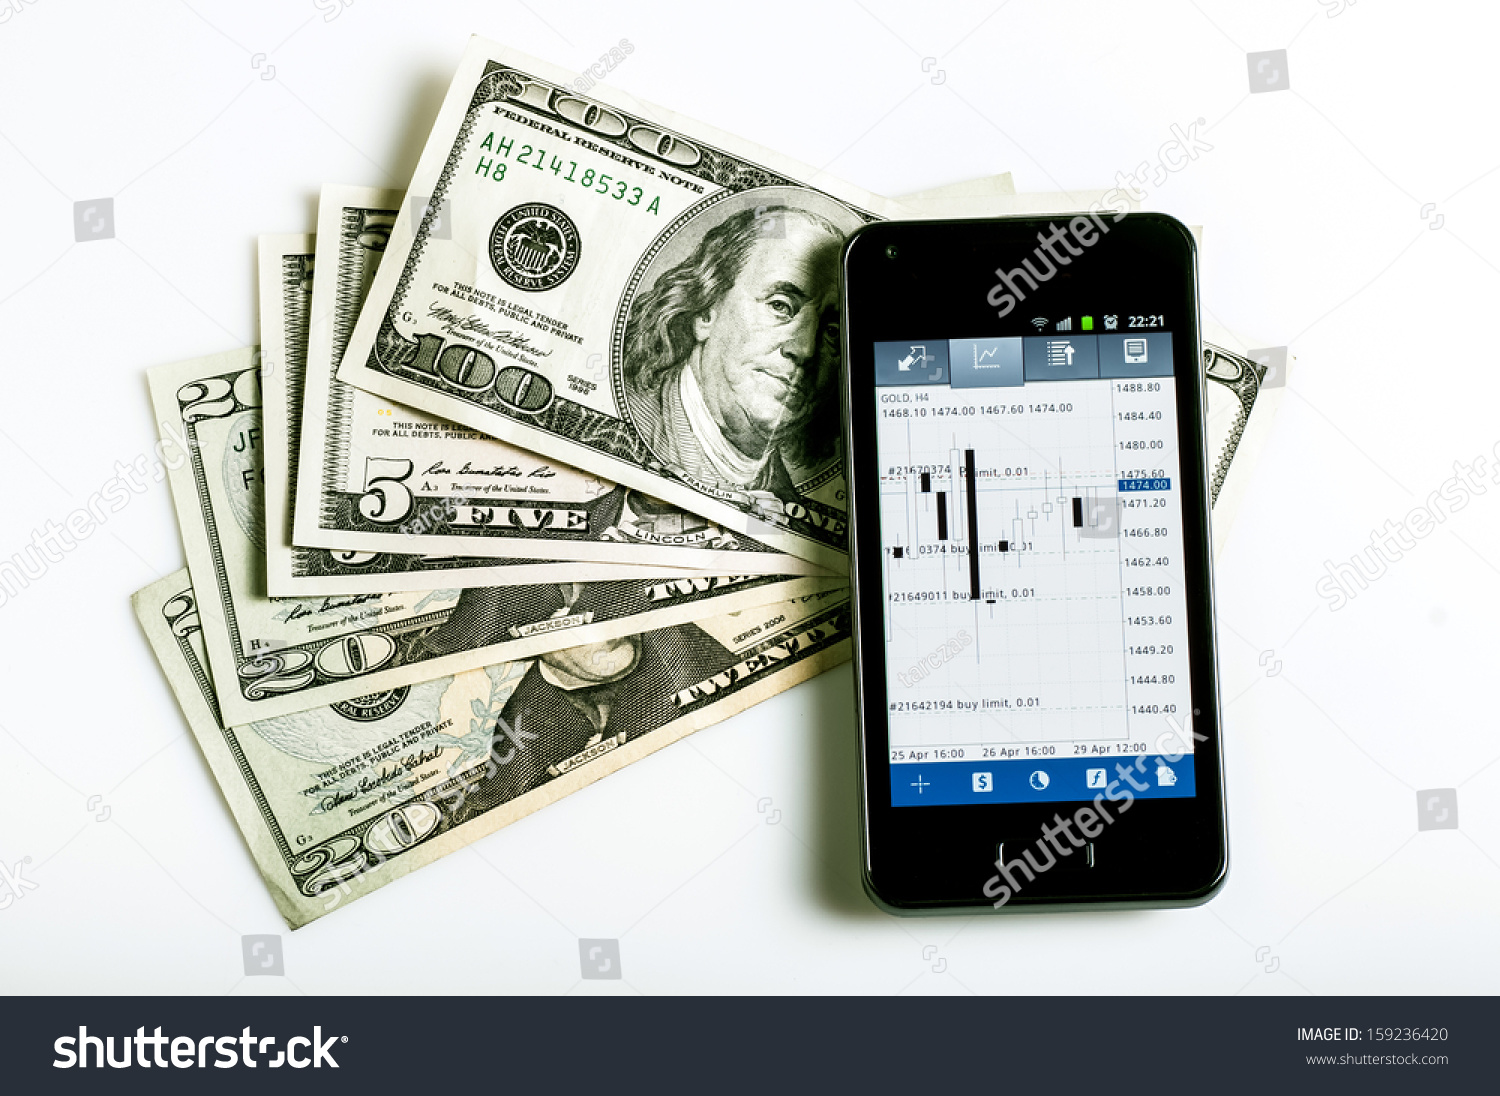 forex trading on mobile phone